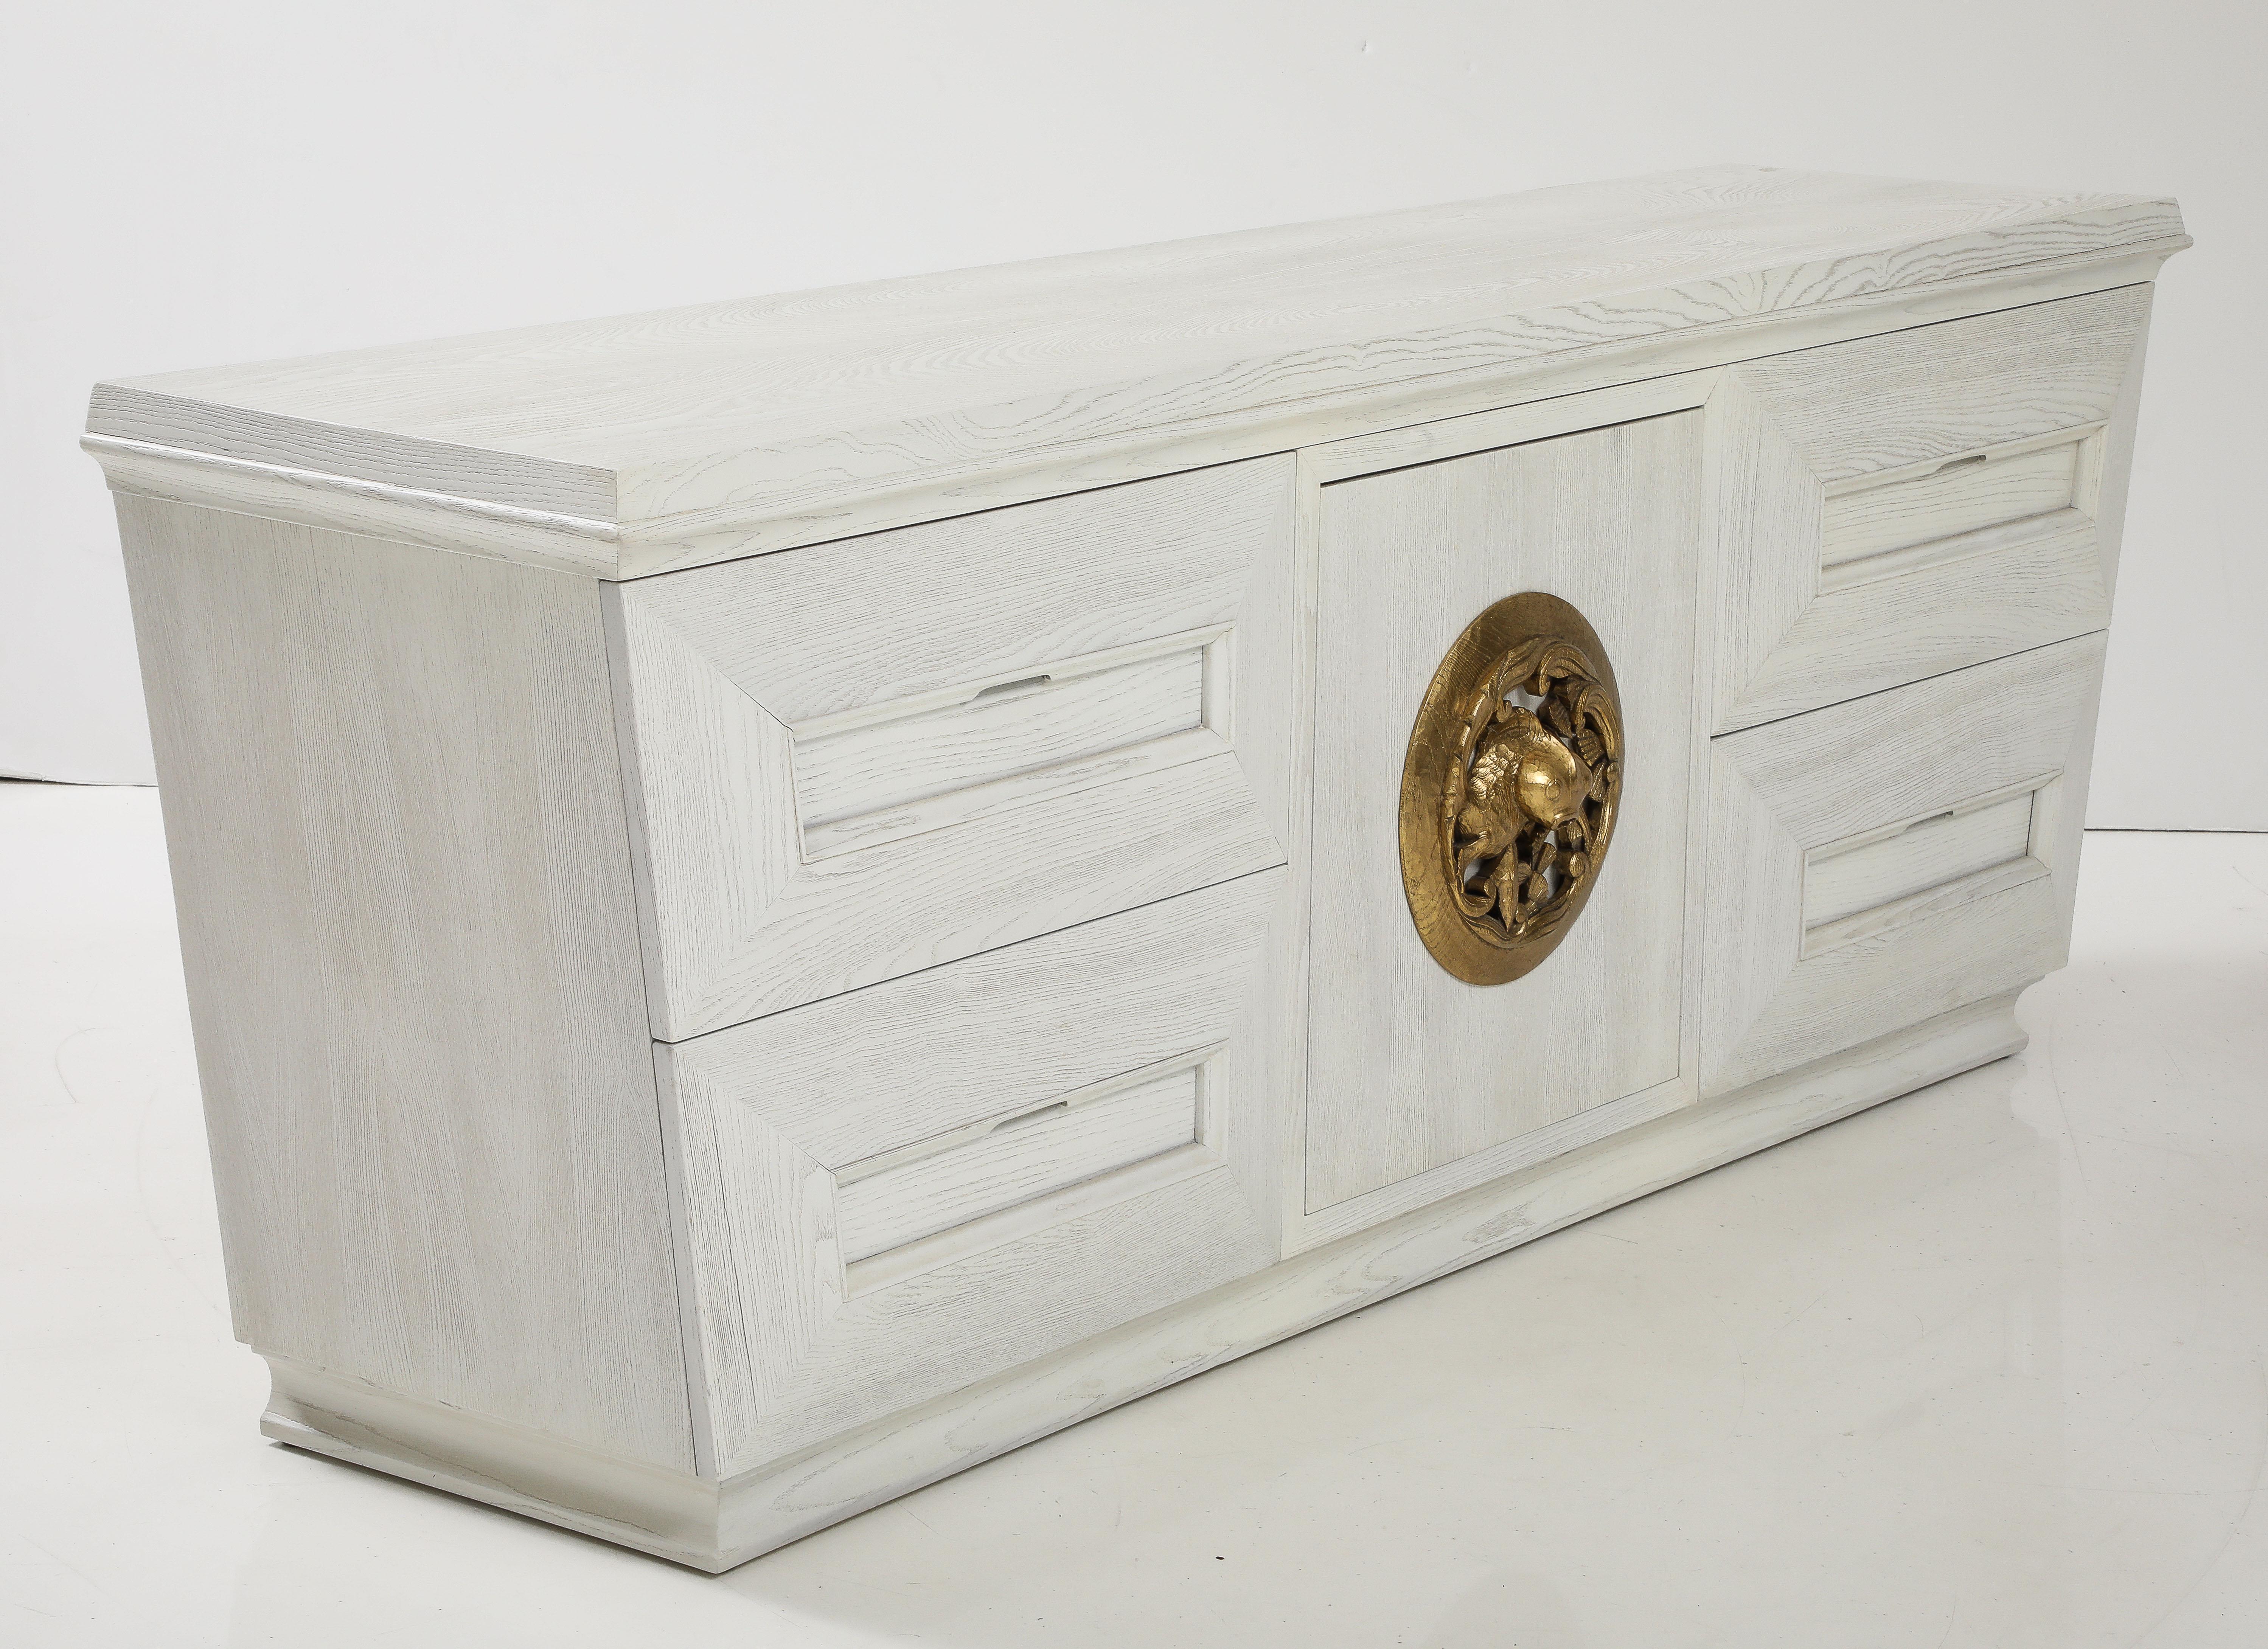 Rare, made to order Koi cabinet featuring solid oak construction which has a custom white/sand cerused, wire brush finish. Cabinet features 4 large deep drawers and a center compartment with 1 shelf. Center compartment adorned with a heavily hand